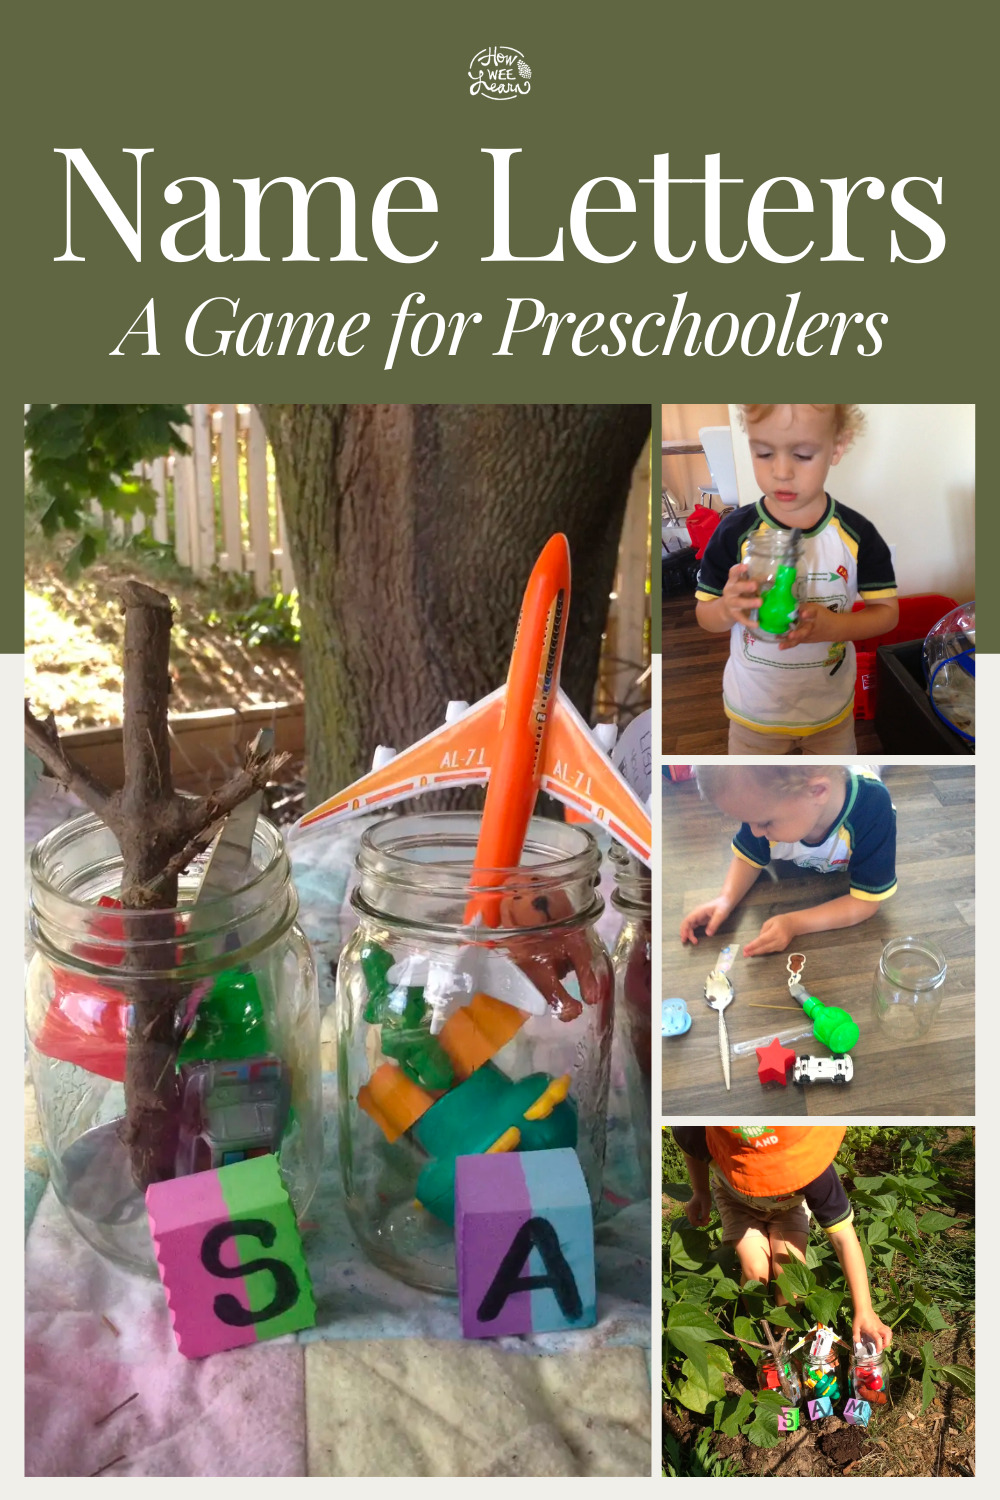 Name Letters: A Game for Preschoolers to Teach Letter Sounds